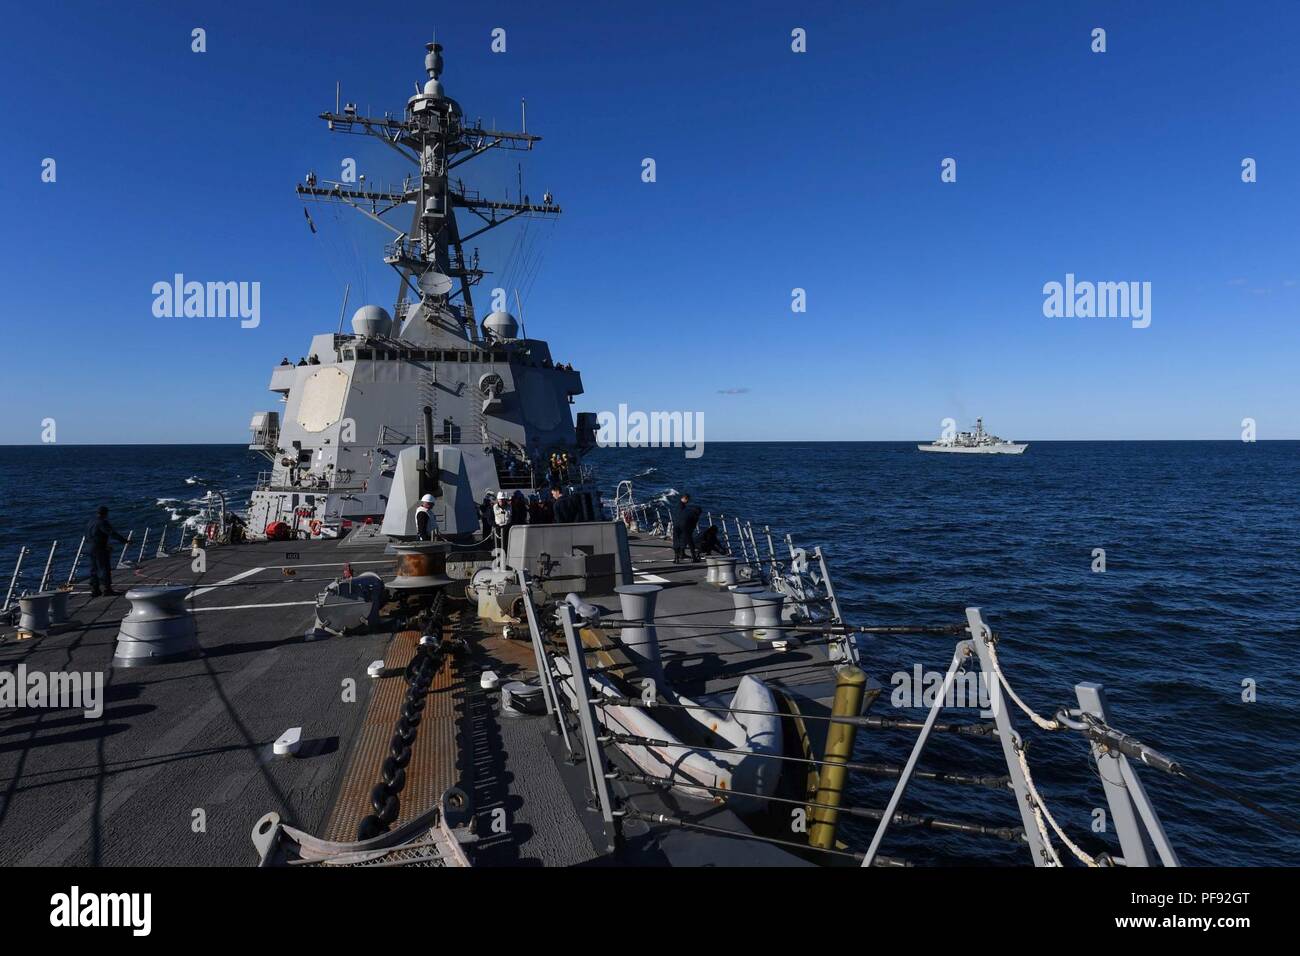 SEA (June 6, 2018) The Arleigh Burke-class guided-missile destroyer USS Bainbridge (DDG 96) and the Royal Navy’s Duke-class frigate HMS Monmouth (F 235) approach the German Berlin-class replenishment ship Frankfurt am Main (A 1412) for refueling during exercise Baltic Operations (BALTOPS) 2018. BALTOPS is the premier annual maritime-focused exercise in the Baltic Region and one of the largest exercises in Northern Europe that is designed to enhancing flexibility and interoperability among allied and partner nations. Stock Photo